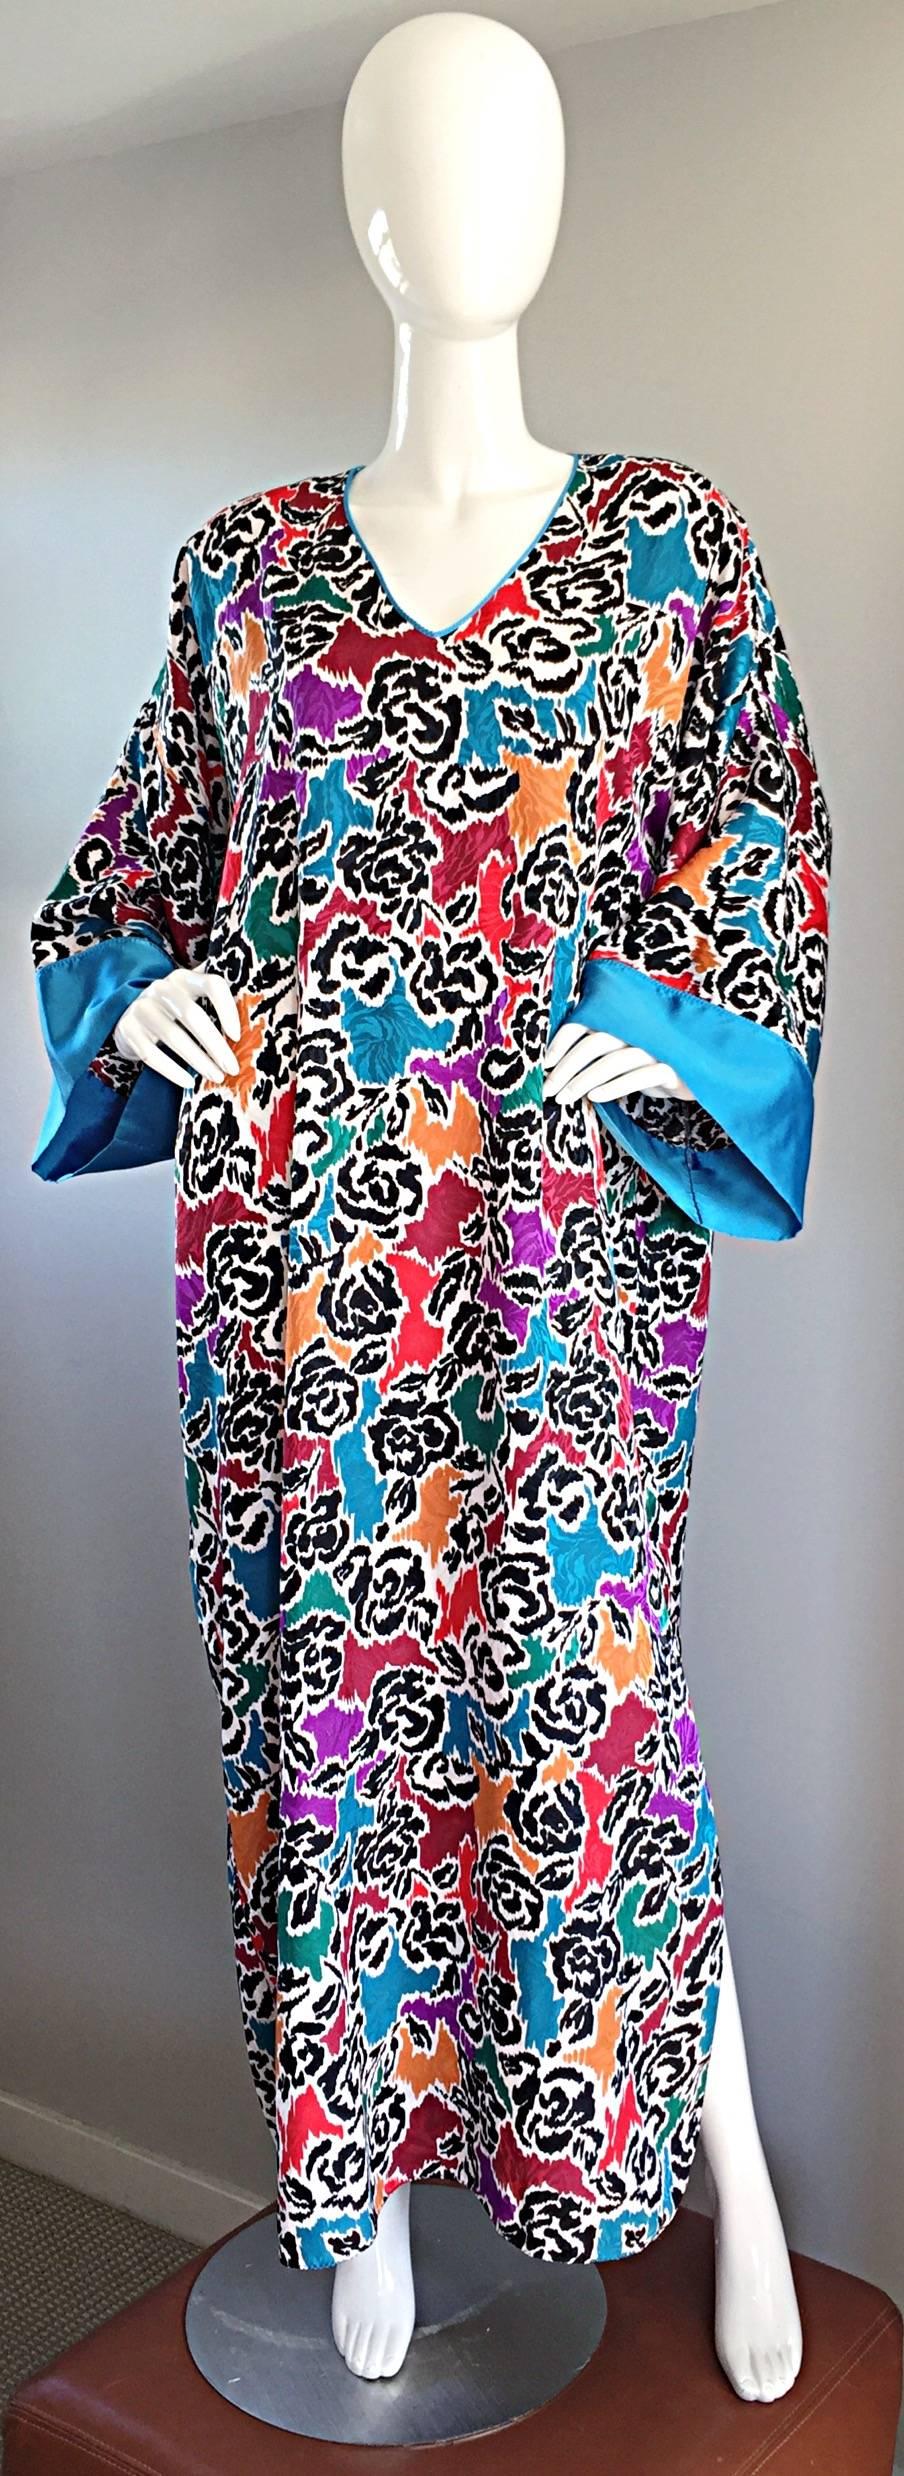 Magnificent vintage MARY MCFADDEN for I. Magnin caftan / kaftan !!! Features a wild print of florals, mixed with a leopard print. Slit up one side of the hem. Perfect by itself, or belted. Great over a swimsuit! Insanely silky and comfortable, while